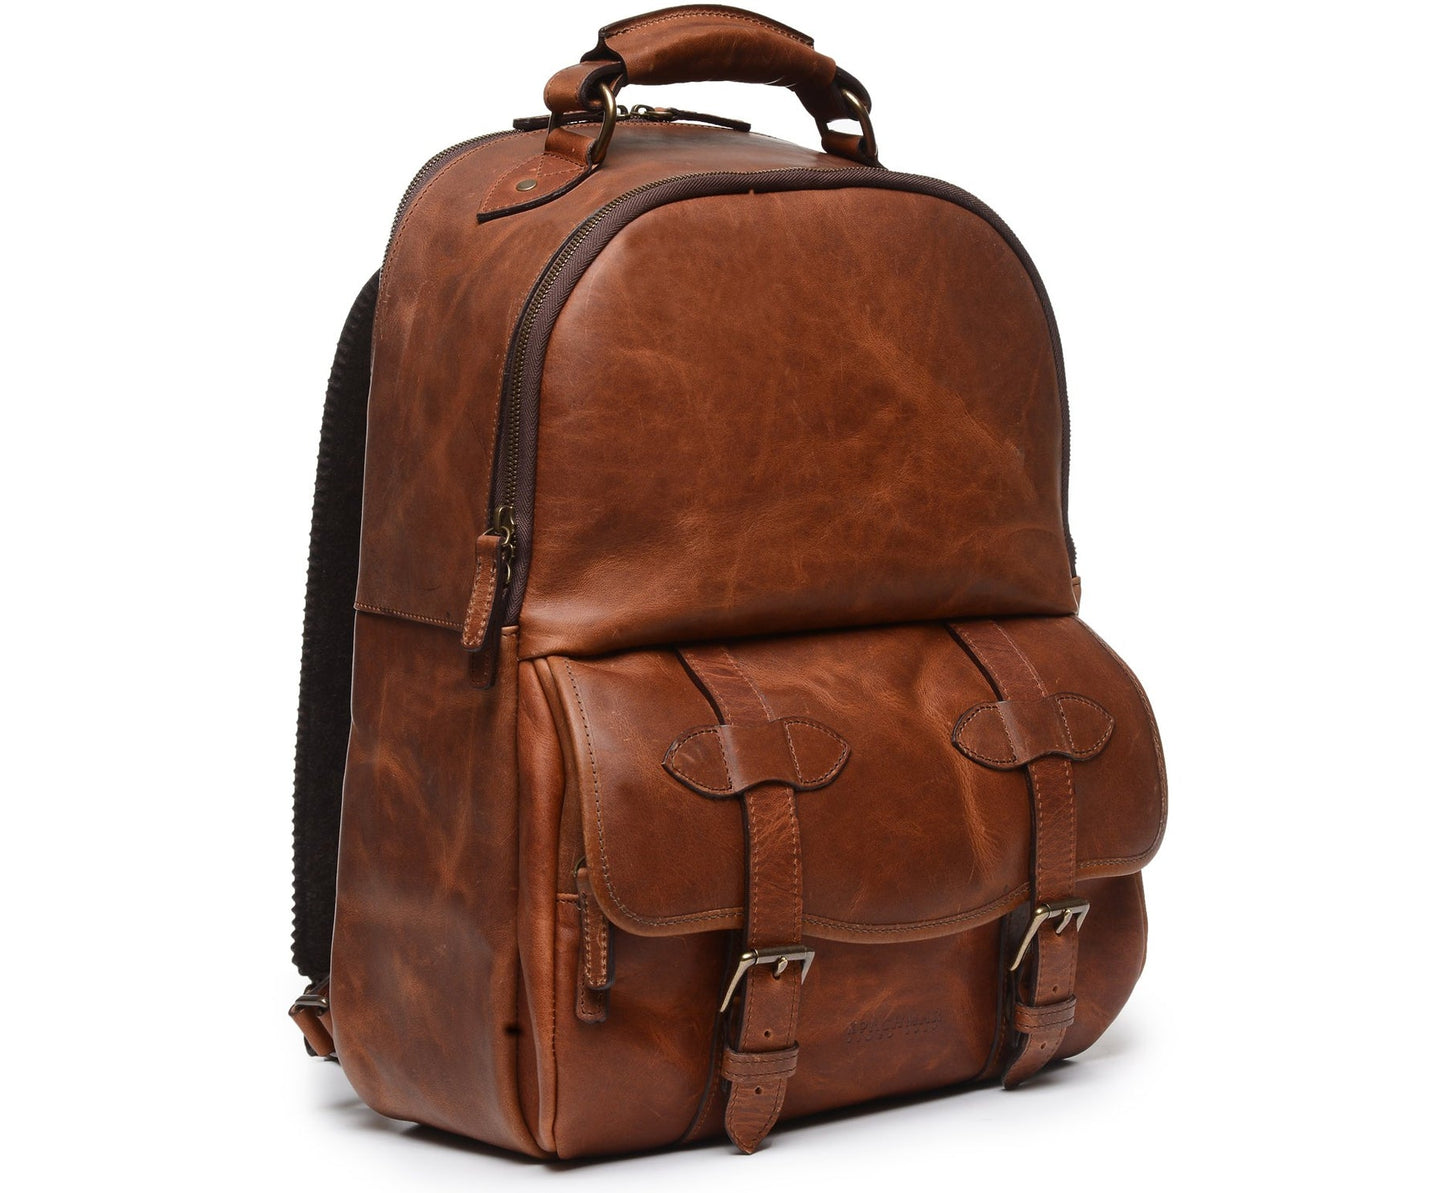 Lewis Classic 16" Leather Backpack | Classic Chestnut Brown Leather Backpack  | Made in USA | Korchmar